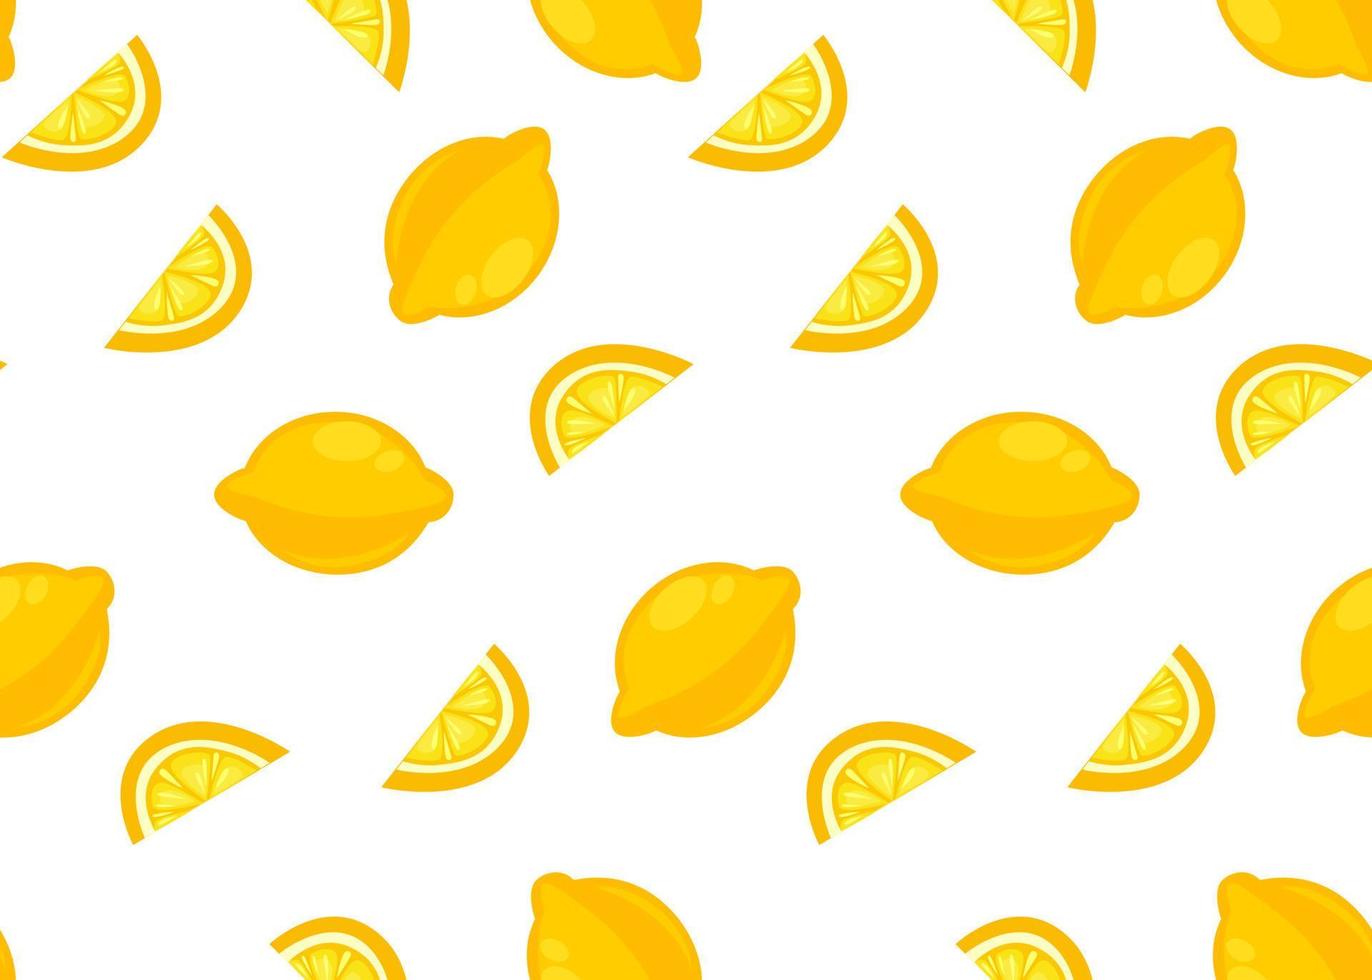 Lemons whole and sliced pieces, seamless pattern vector